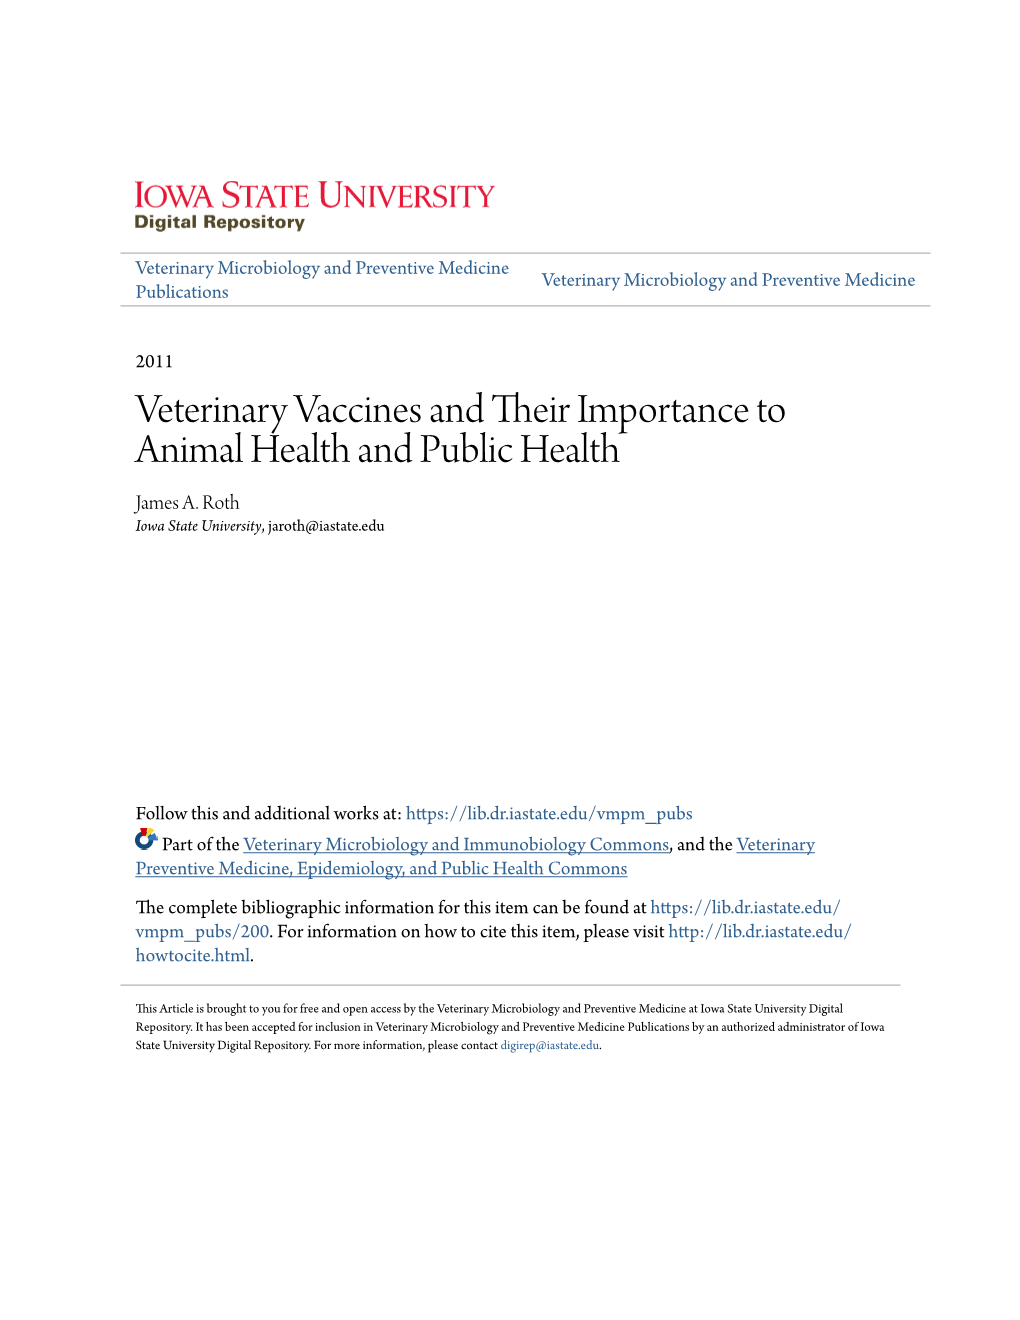 Veterinary Vaccines and Their Importance to Animal Health and Public Health." Procedia in Vaccinology 5 (2011): 127-136